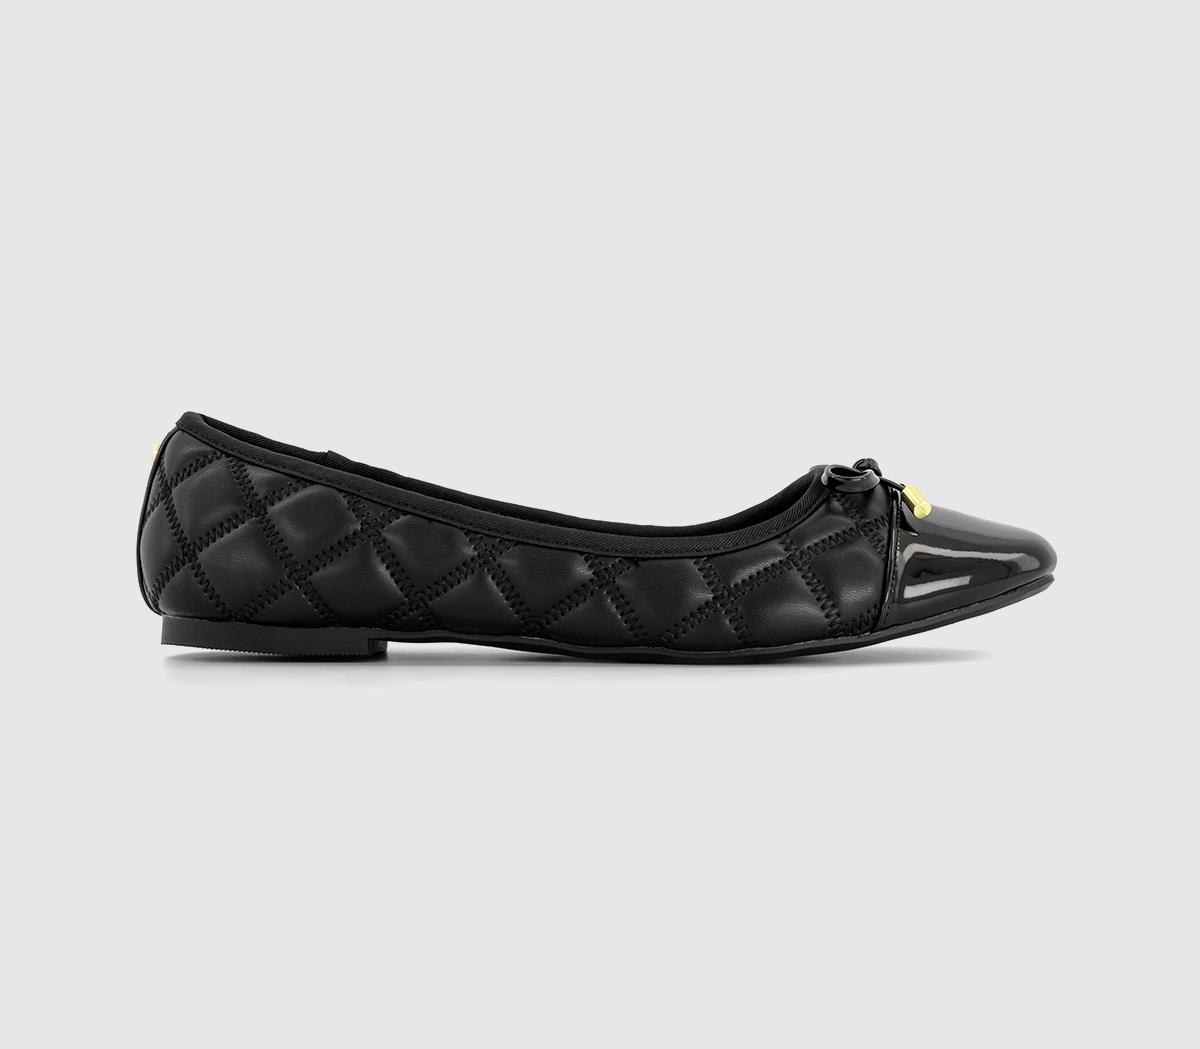 OFFICEForeveryoung Quilted Toe Cap Bow Ballet PumpsBlack